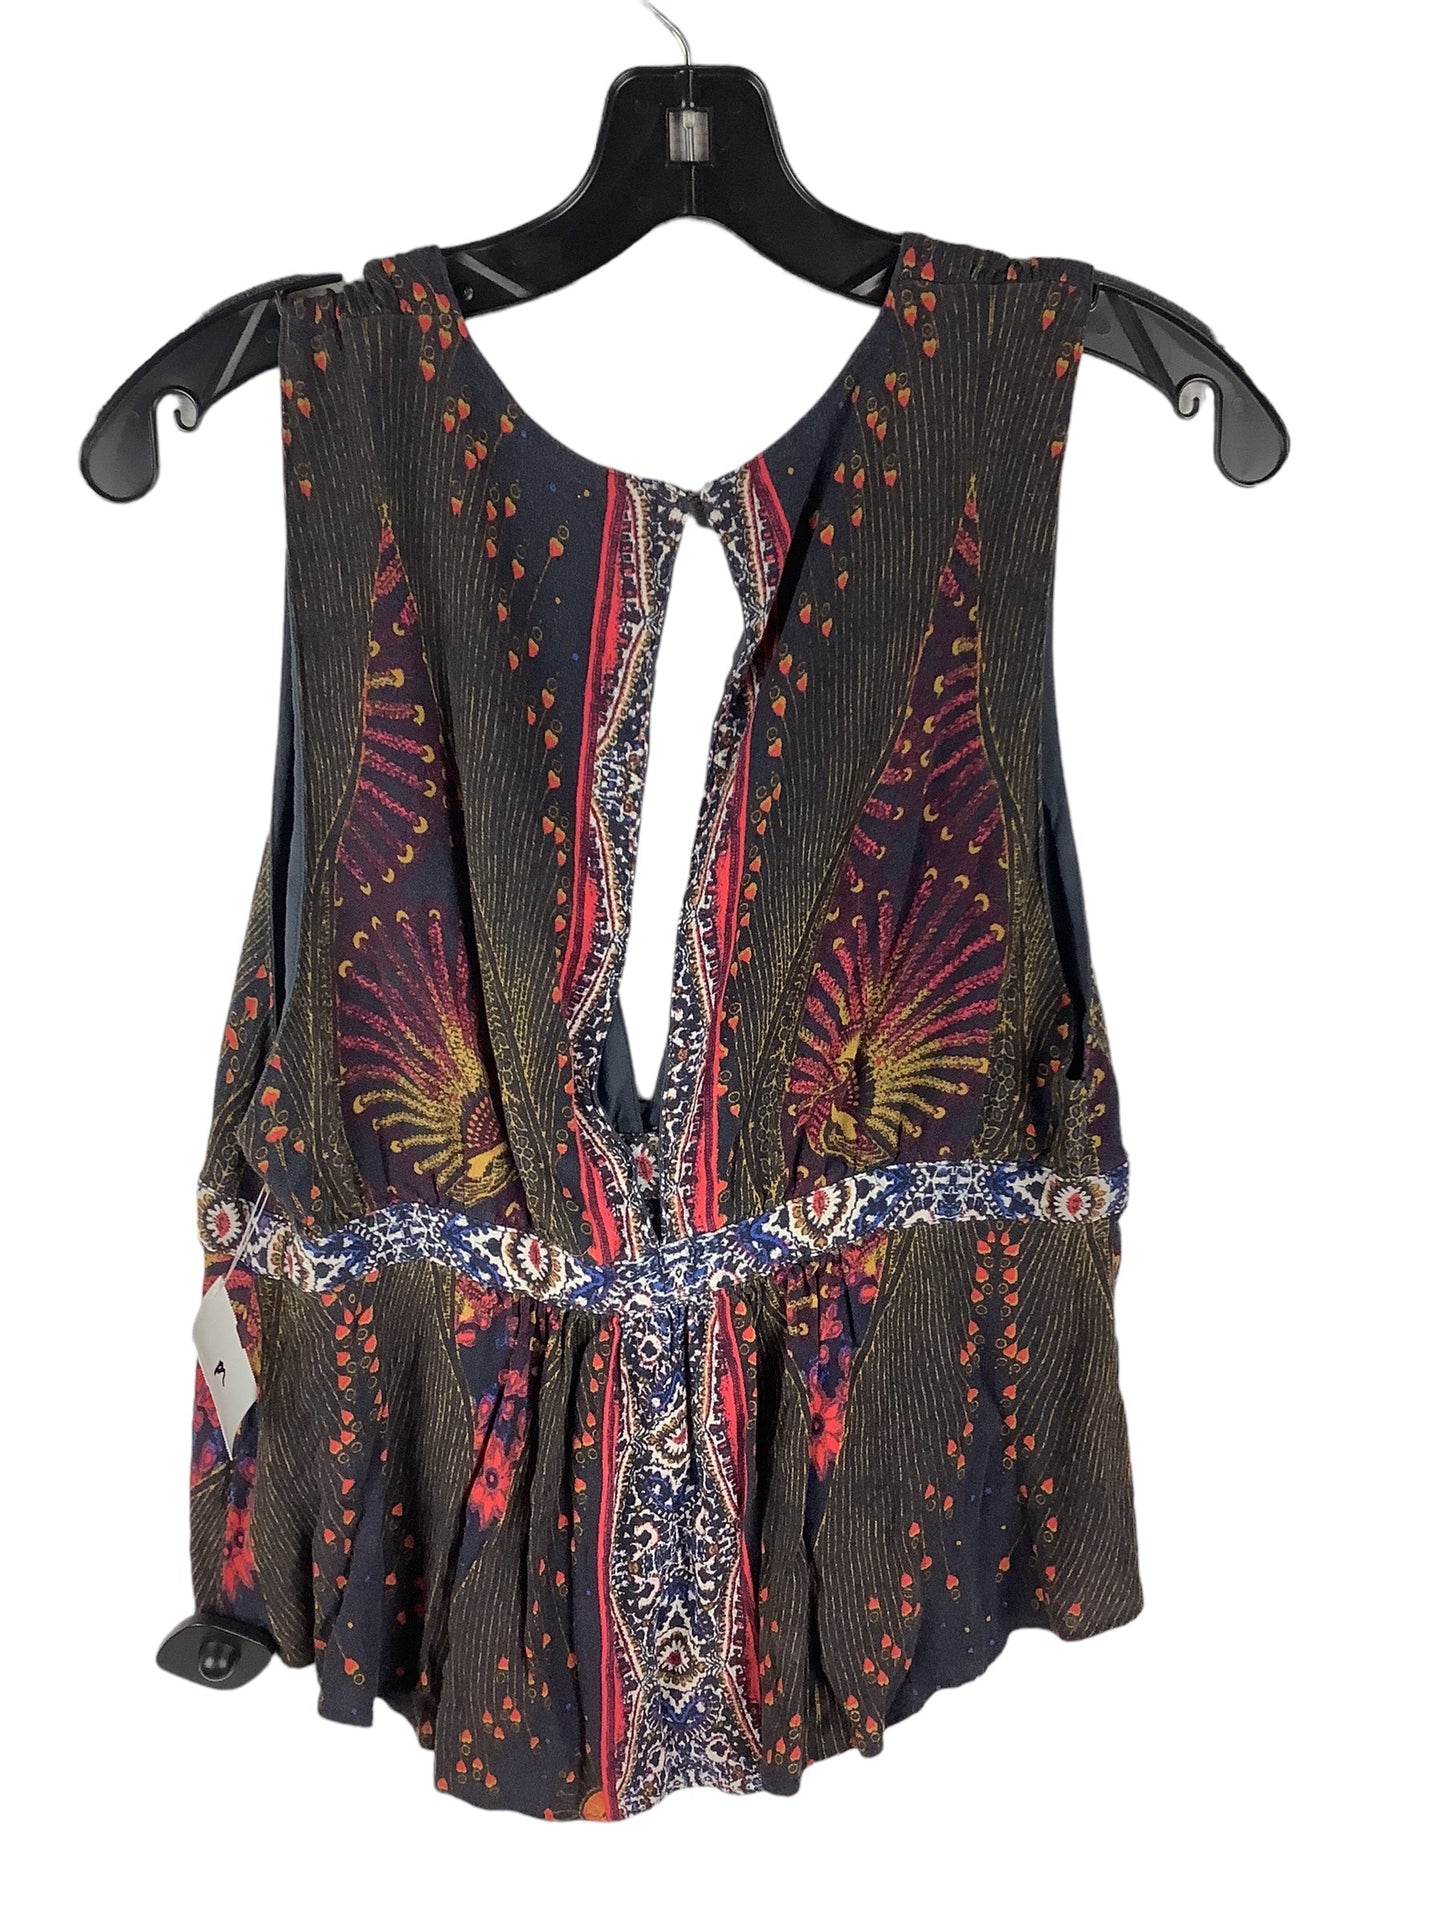 Multi-colored Top Sleeveless Free People, Size L